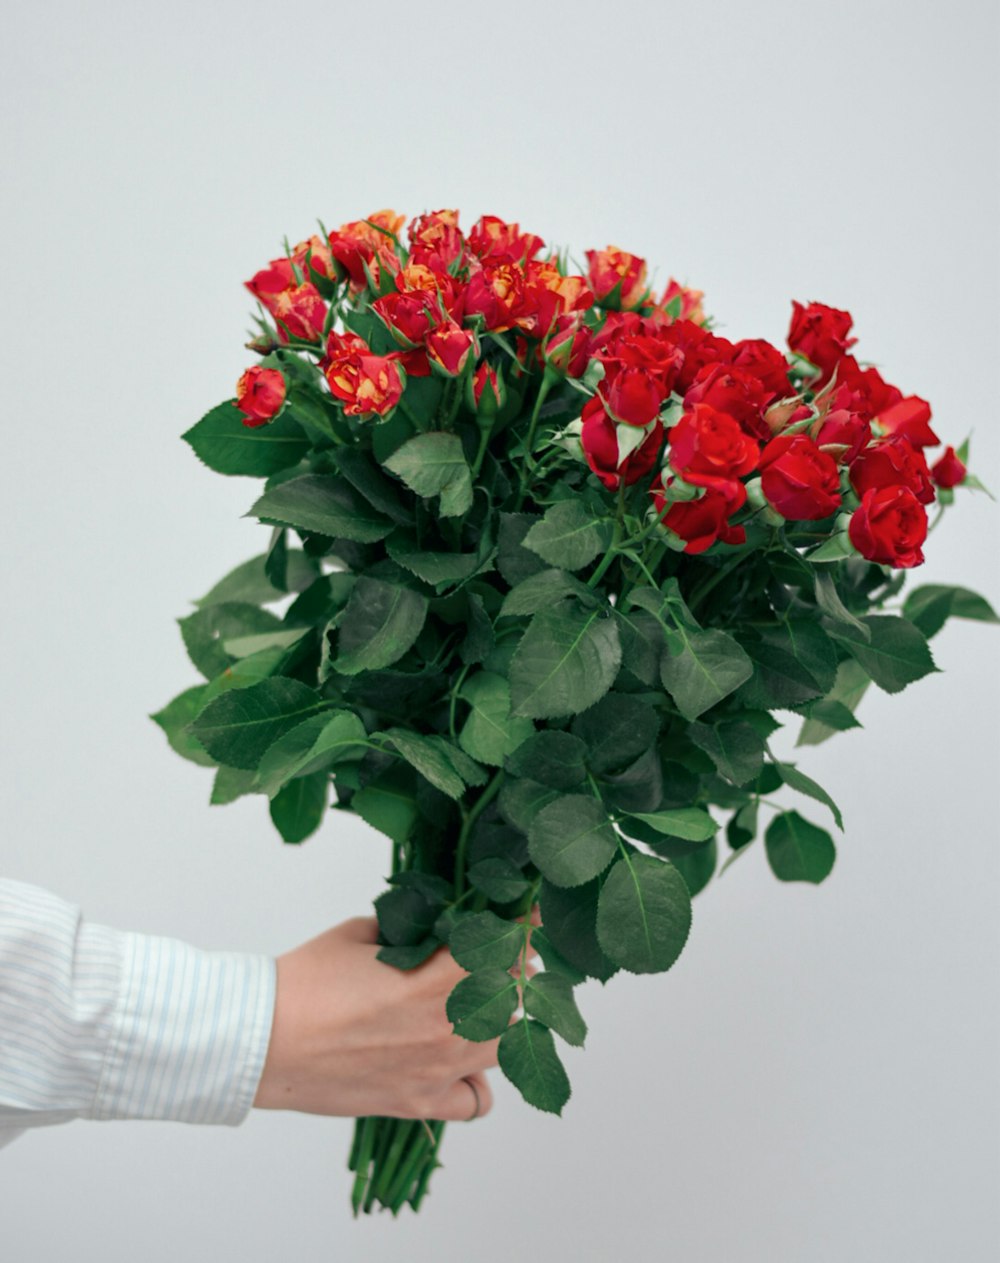 red roses bouquet on persons hand